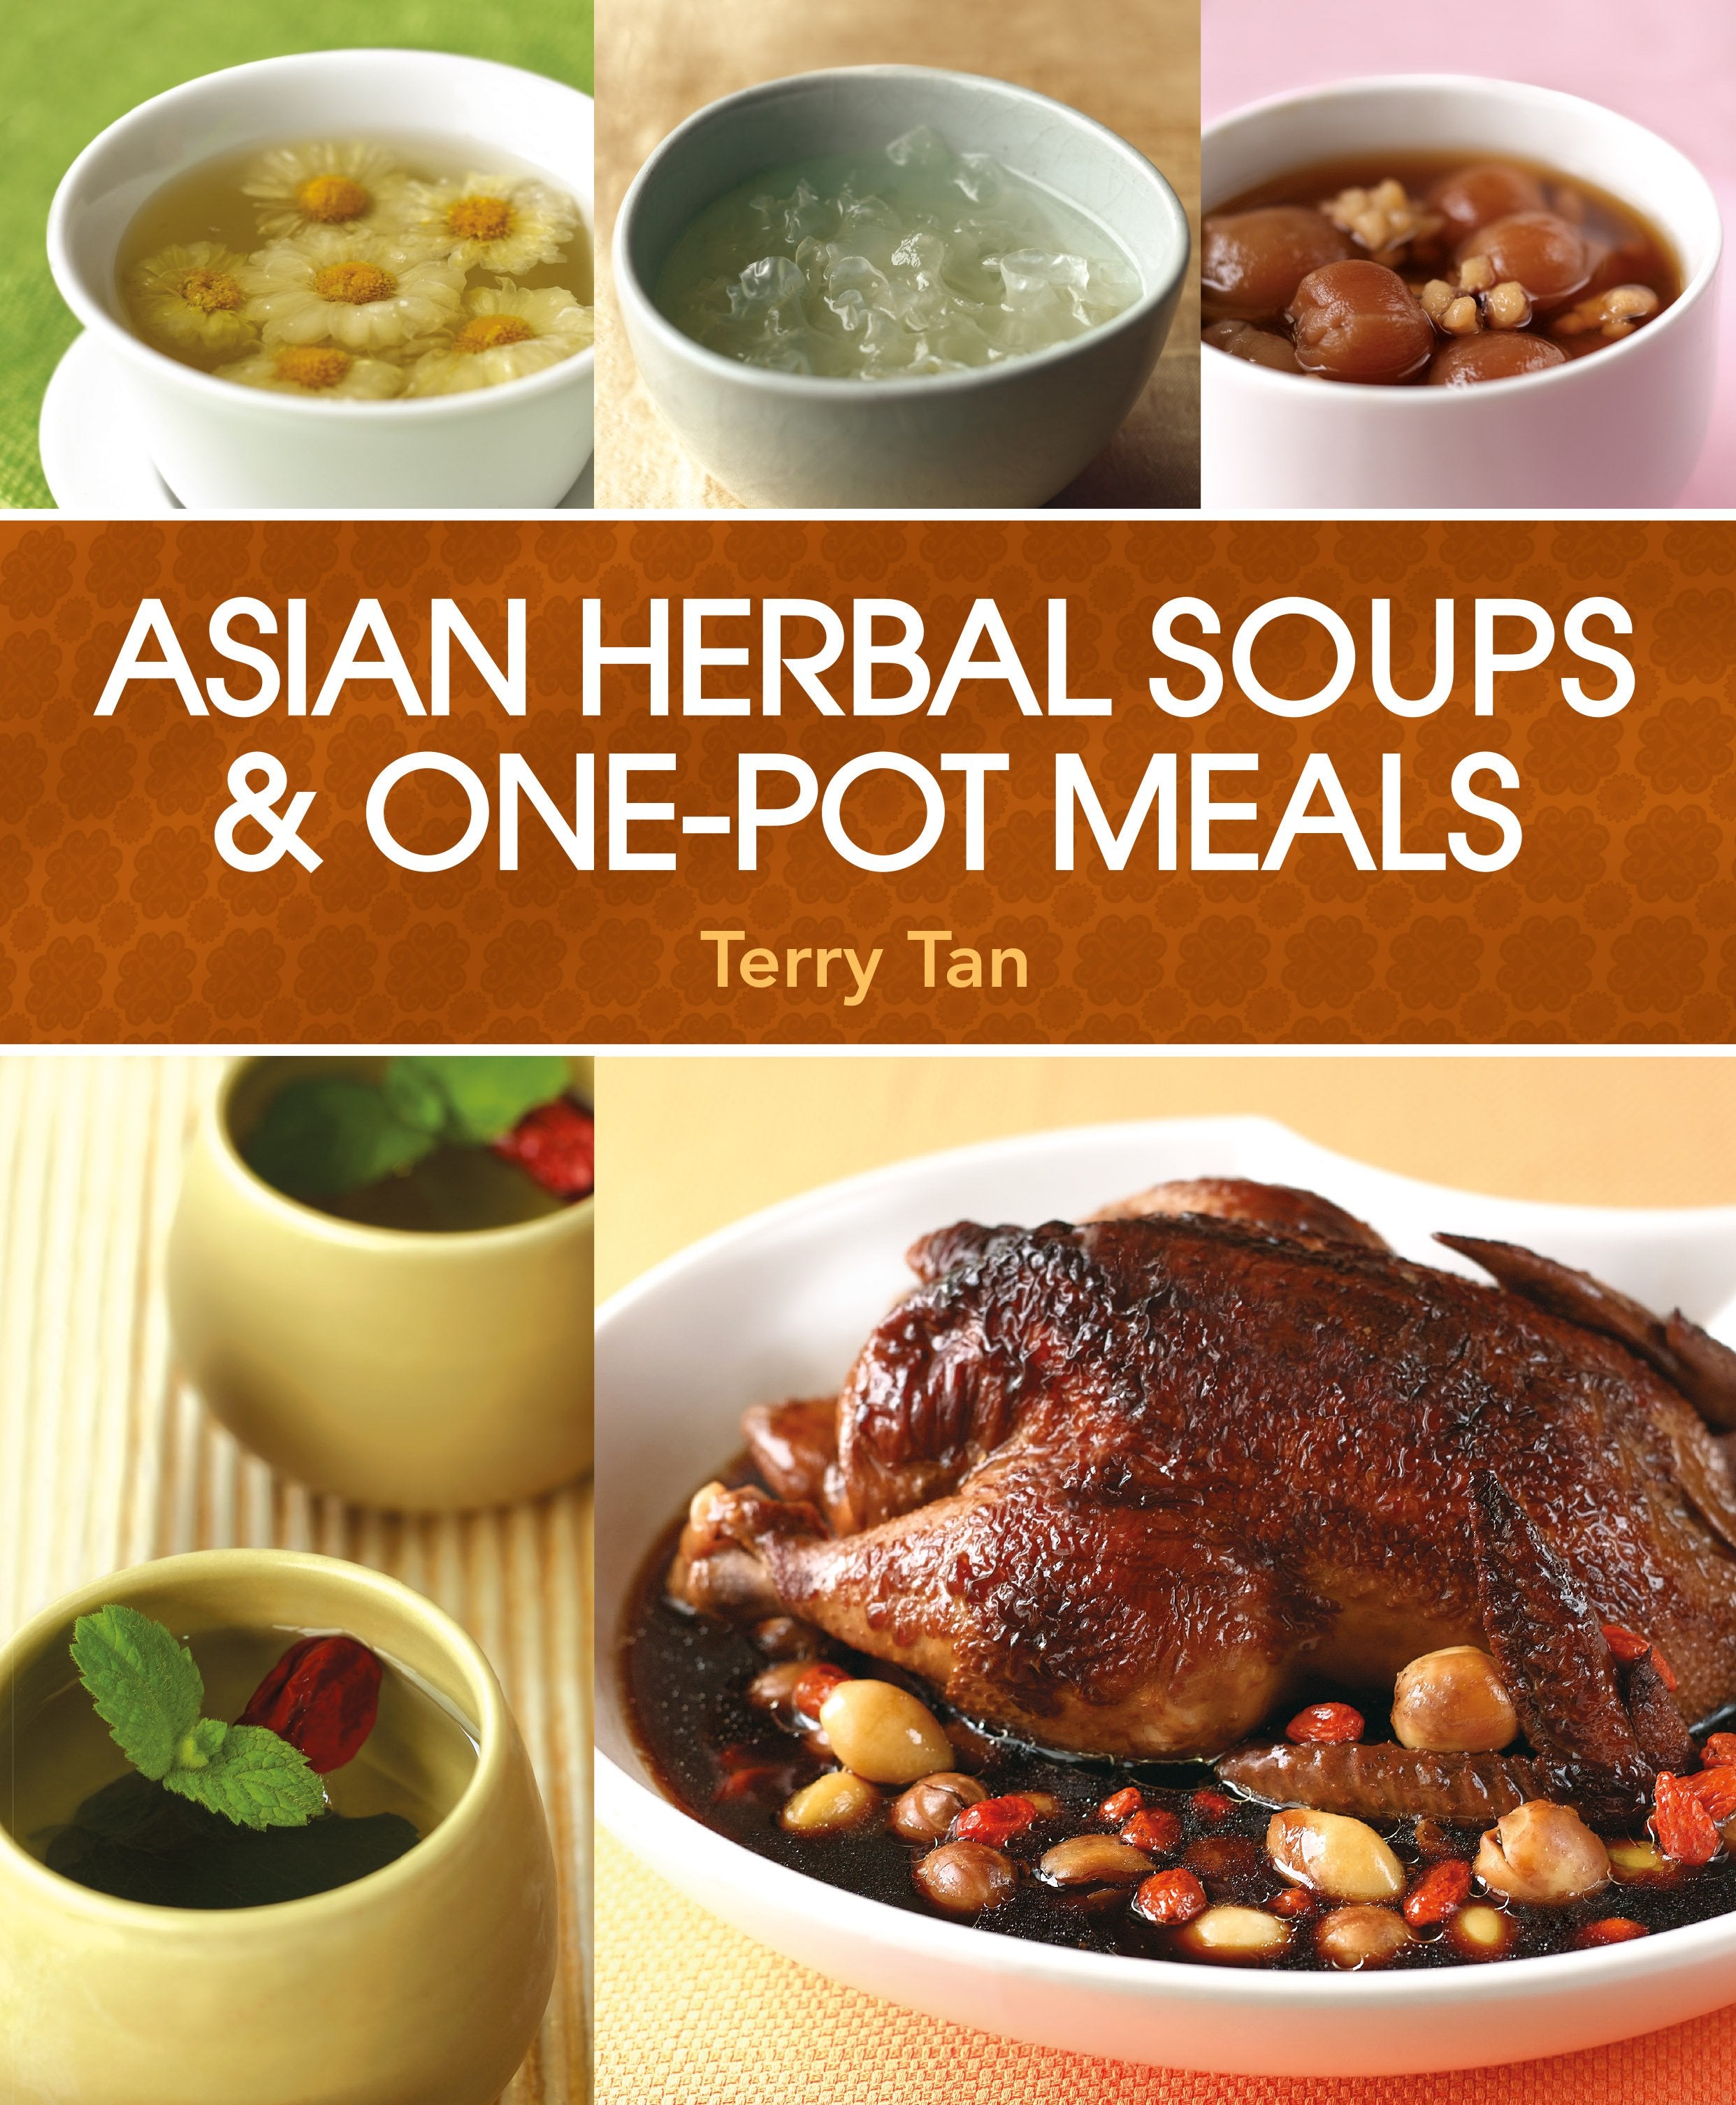 Asian Herbal Soups & One-pot Meals